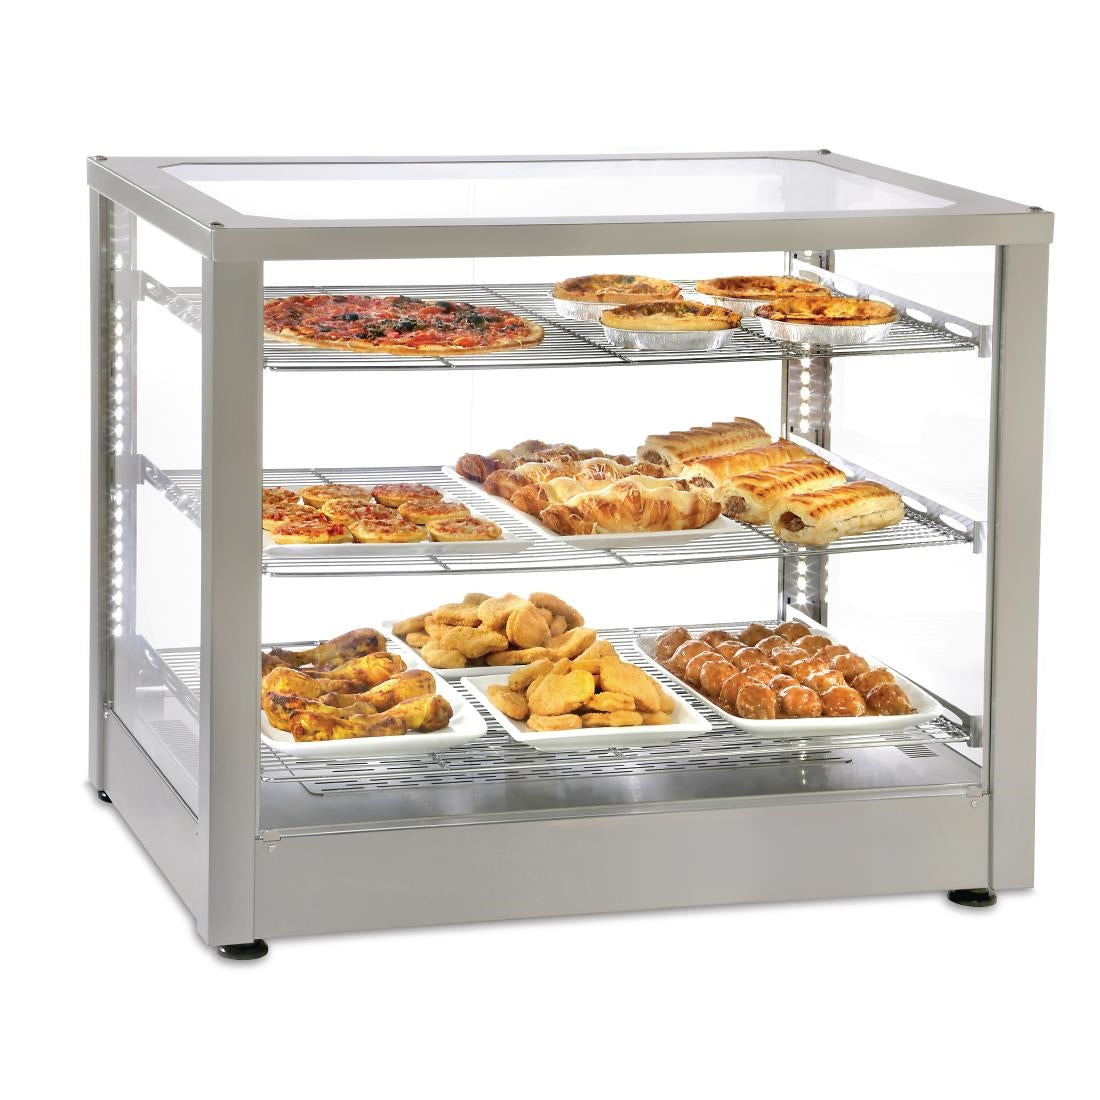 DF412 Roller Grill Heated 3 Shelf Display Cabinet WD780 DI JD Catering Equipment Solutions Ltd